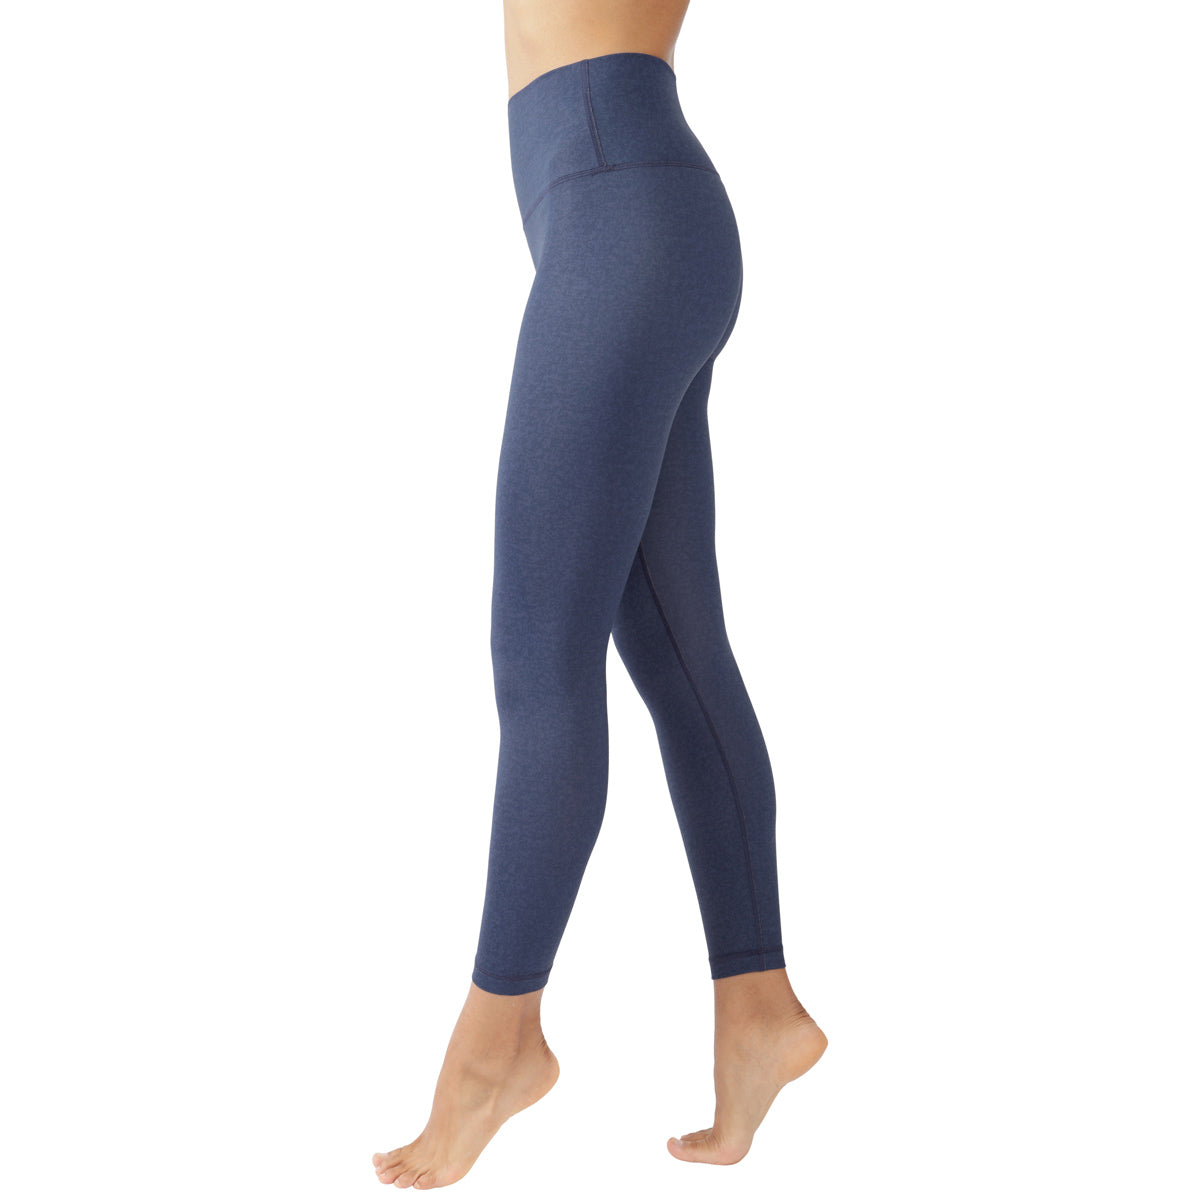 90 degree by Reflex leggings XL Blue Activewear workout clothing